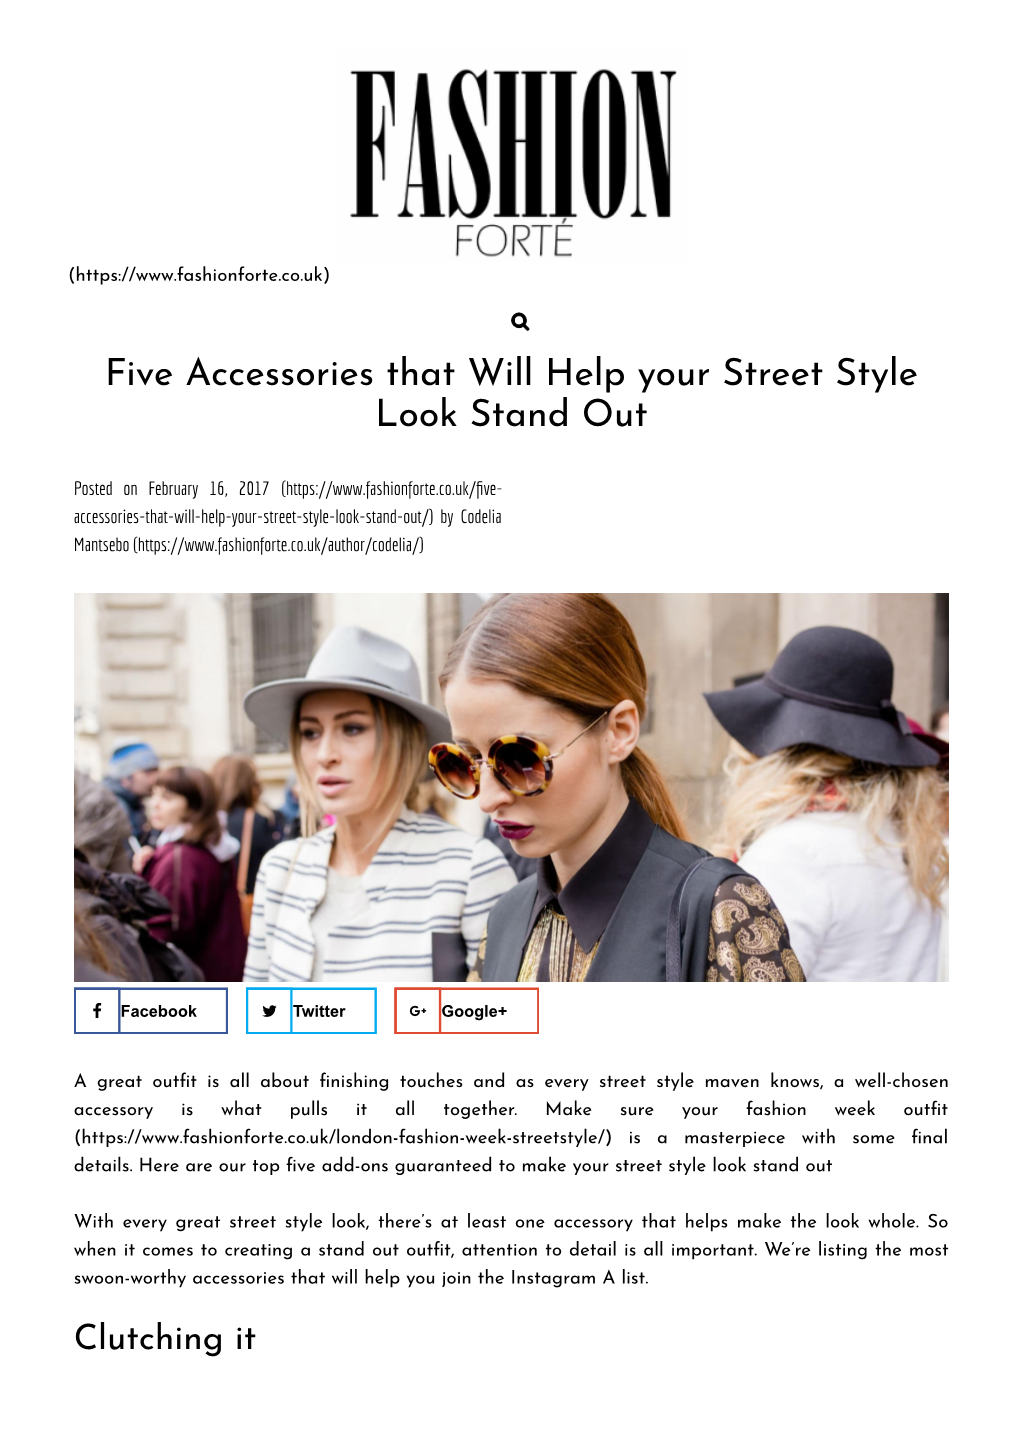 Five Accessories That Will Help Your Street Style Look Stand Out